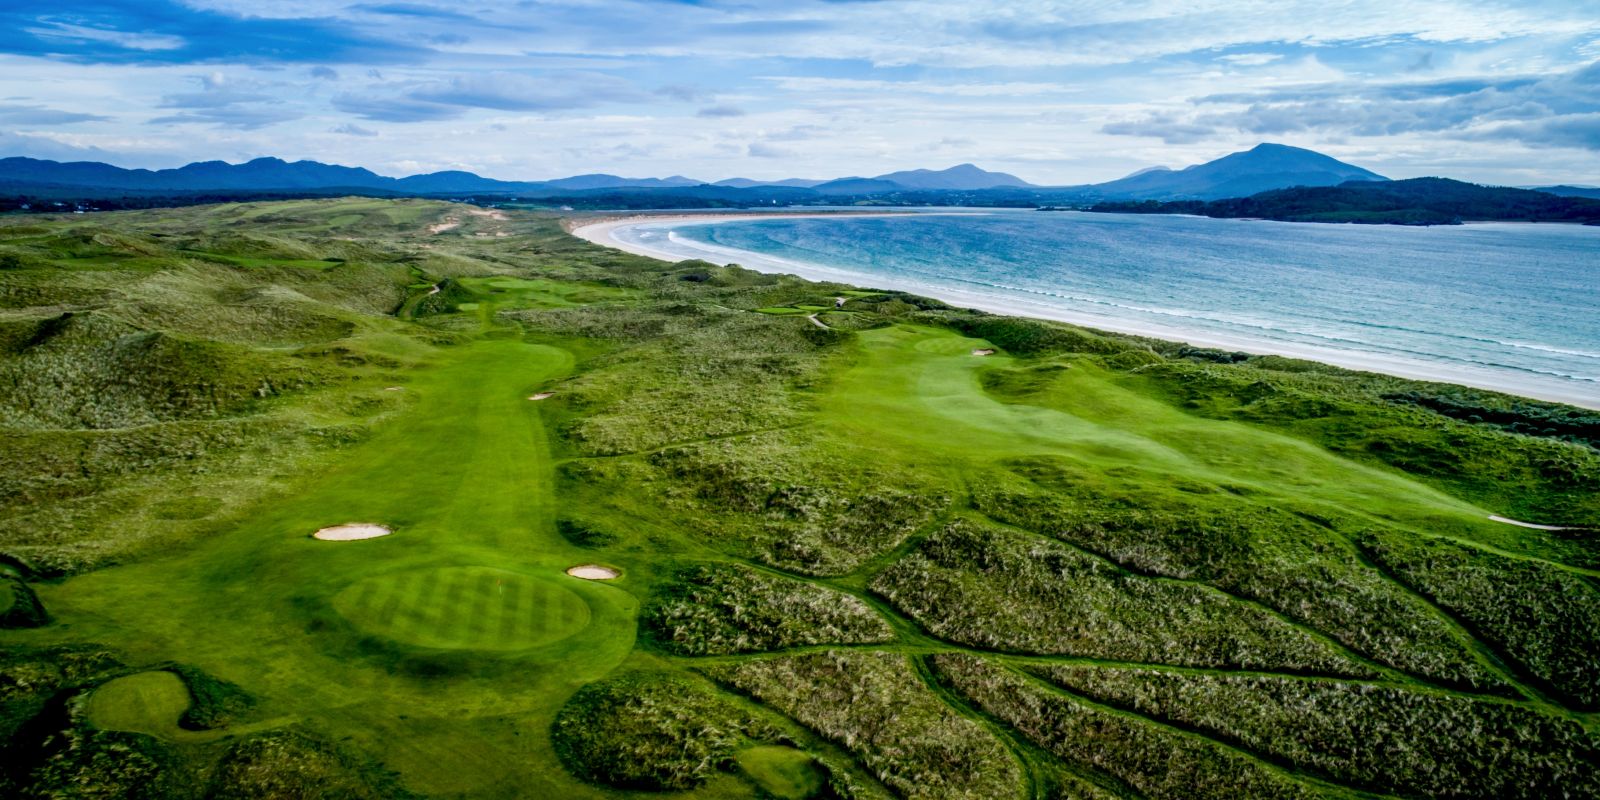 Aerial view of golf greens with fairways and undulating hills on the Old Tom Morris Golf Course at Rosapenna Golf Resort, Ireland